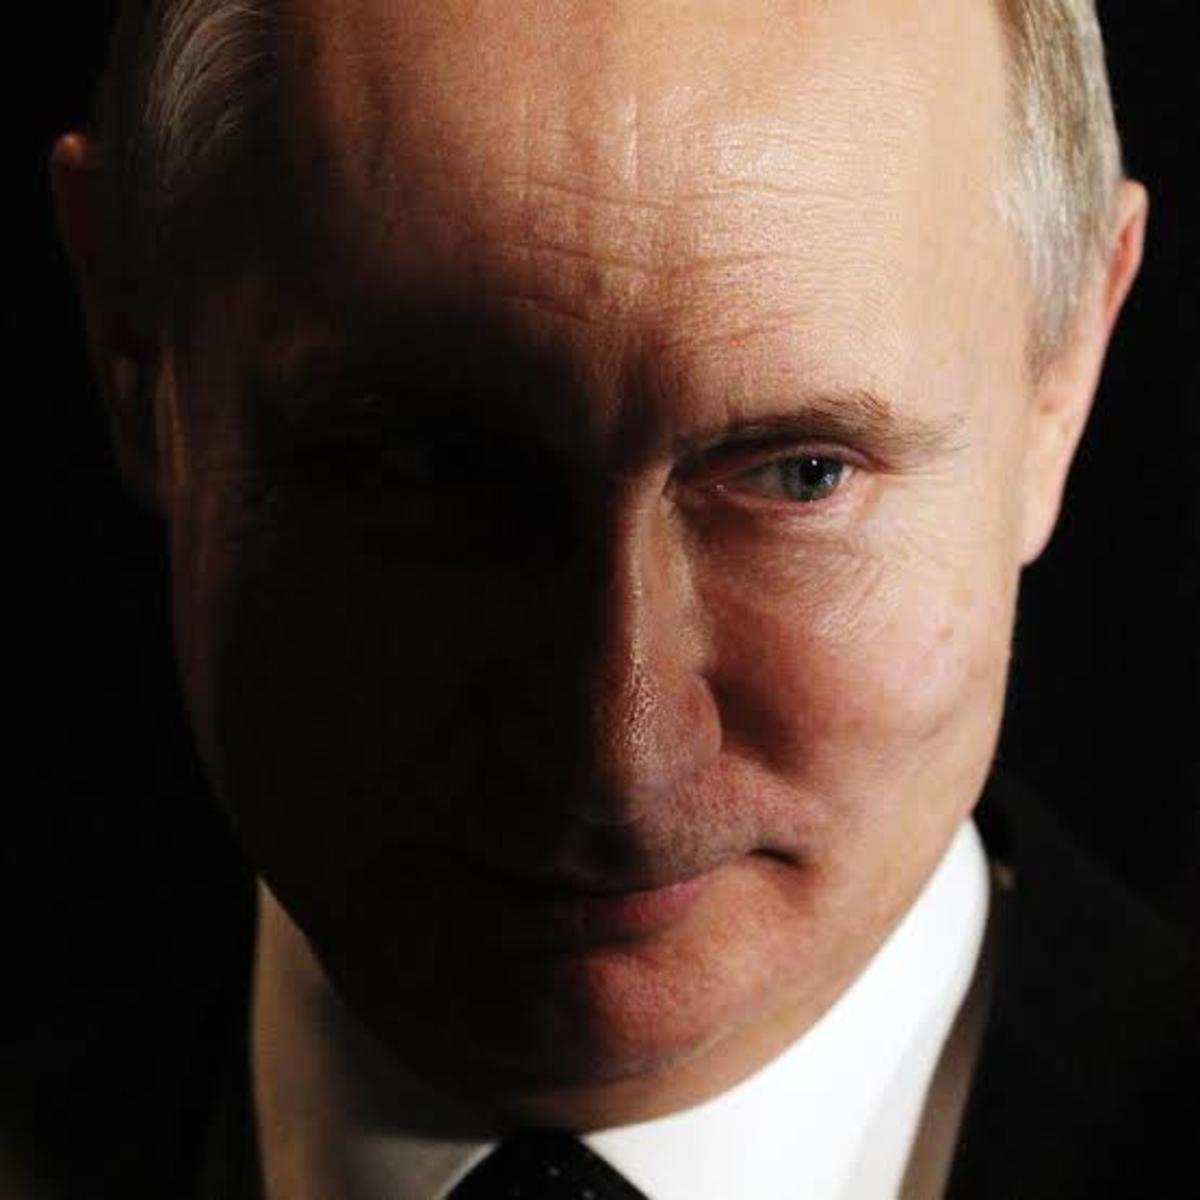 Vladimir Putin: From Intelligence Officer to President of Russia